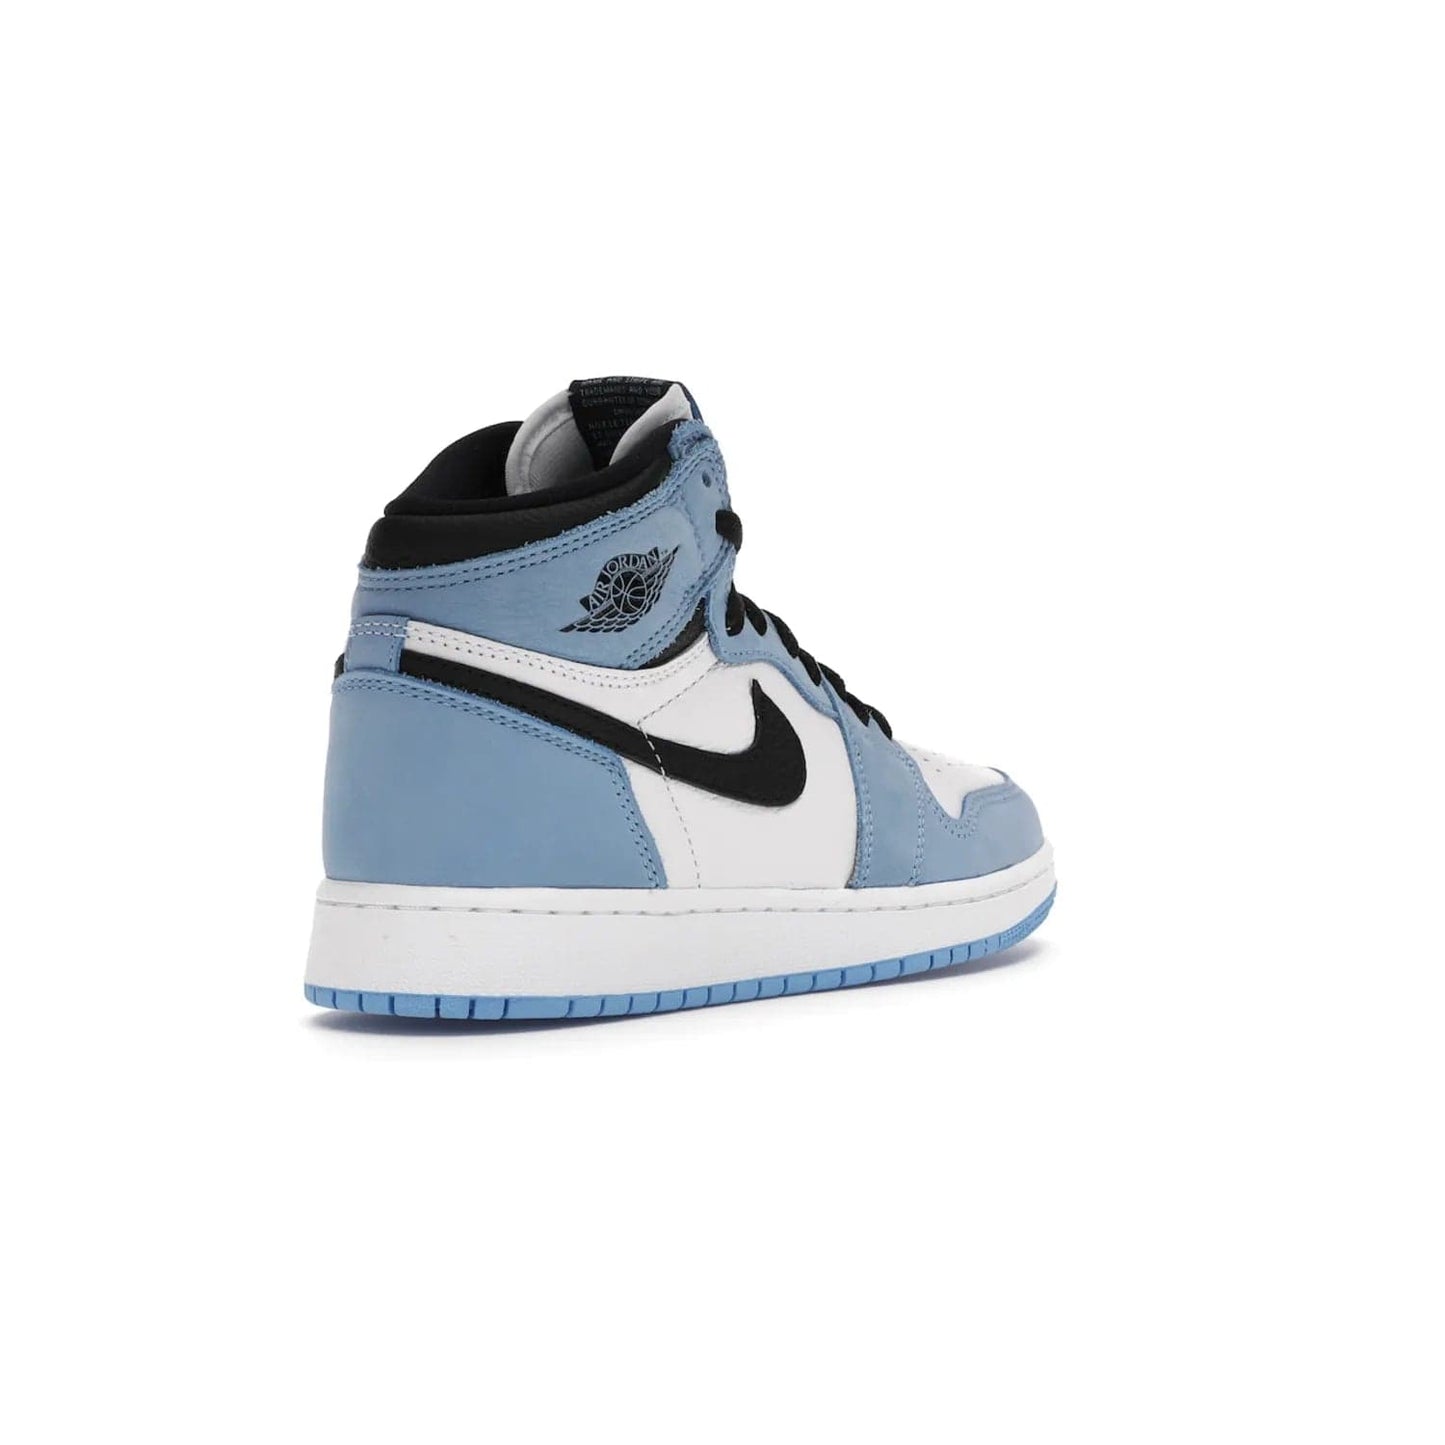 Jordan 1 Retro High White University Blue Black (GS) - Image 32 - Only at www.BallersClubKickz.com - Air Jordan 1 Retro High White University Blue Black GS: the latest offering from the iconic Air Jordan 1 line. White tumbled leather upper with University Blue overlays and black detailing. University Blue outsole and white midsole. March 6 release.